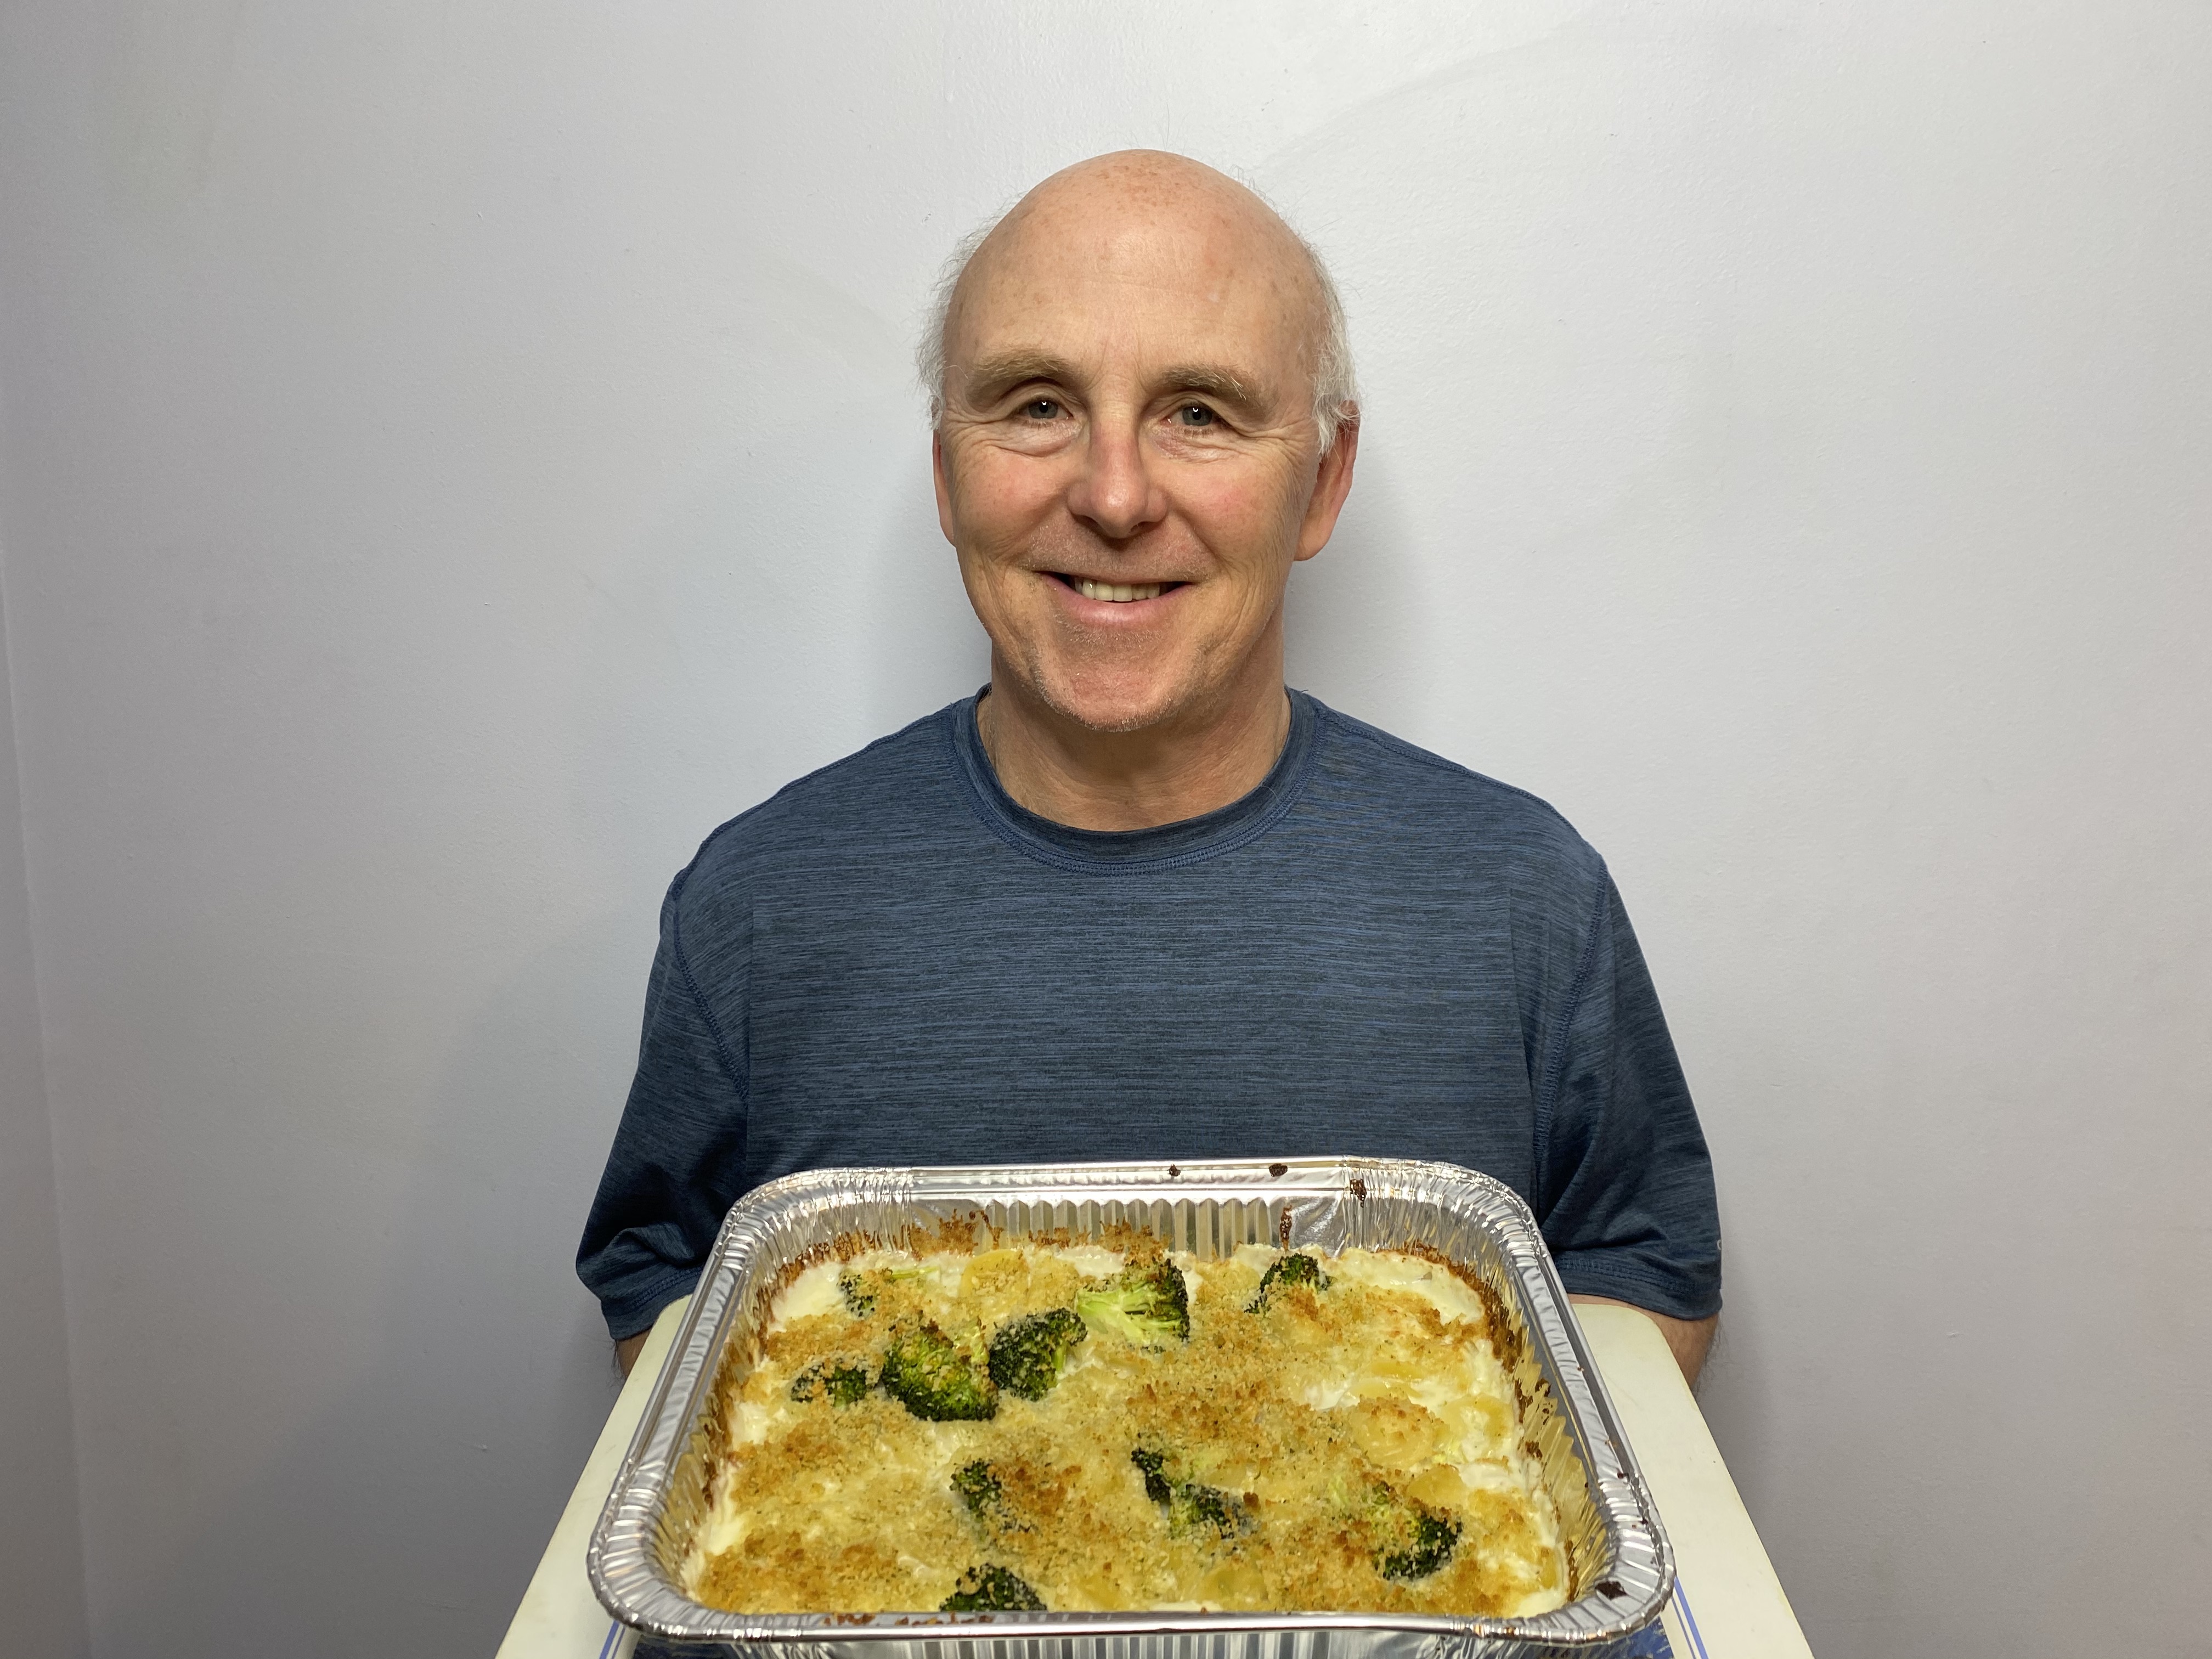 A photo of Chef Rob holding a dish of Provolone and Broccoli Baked Oriecchette Pasta.